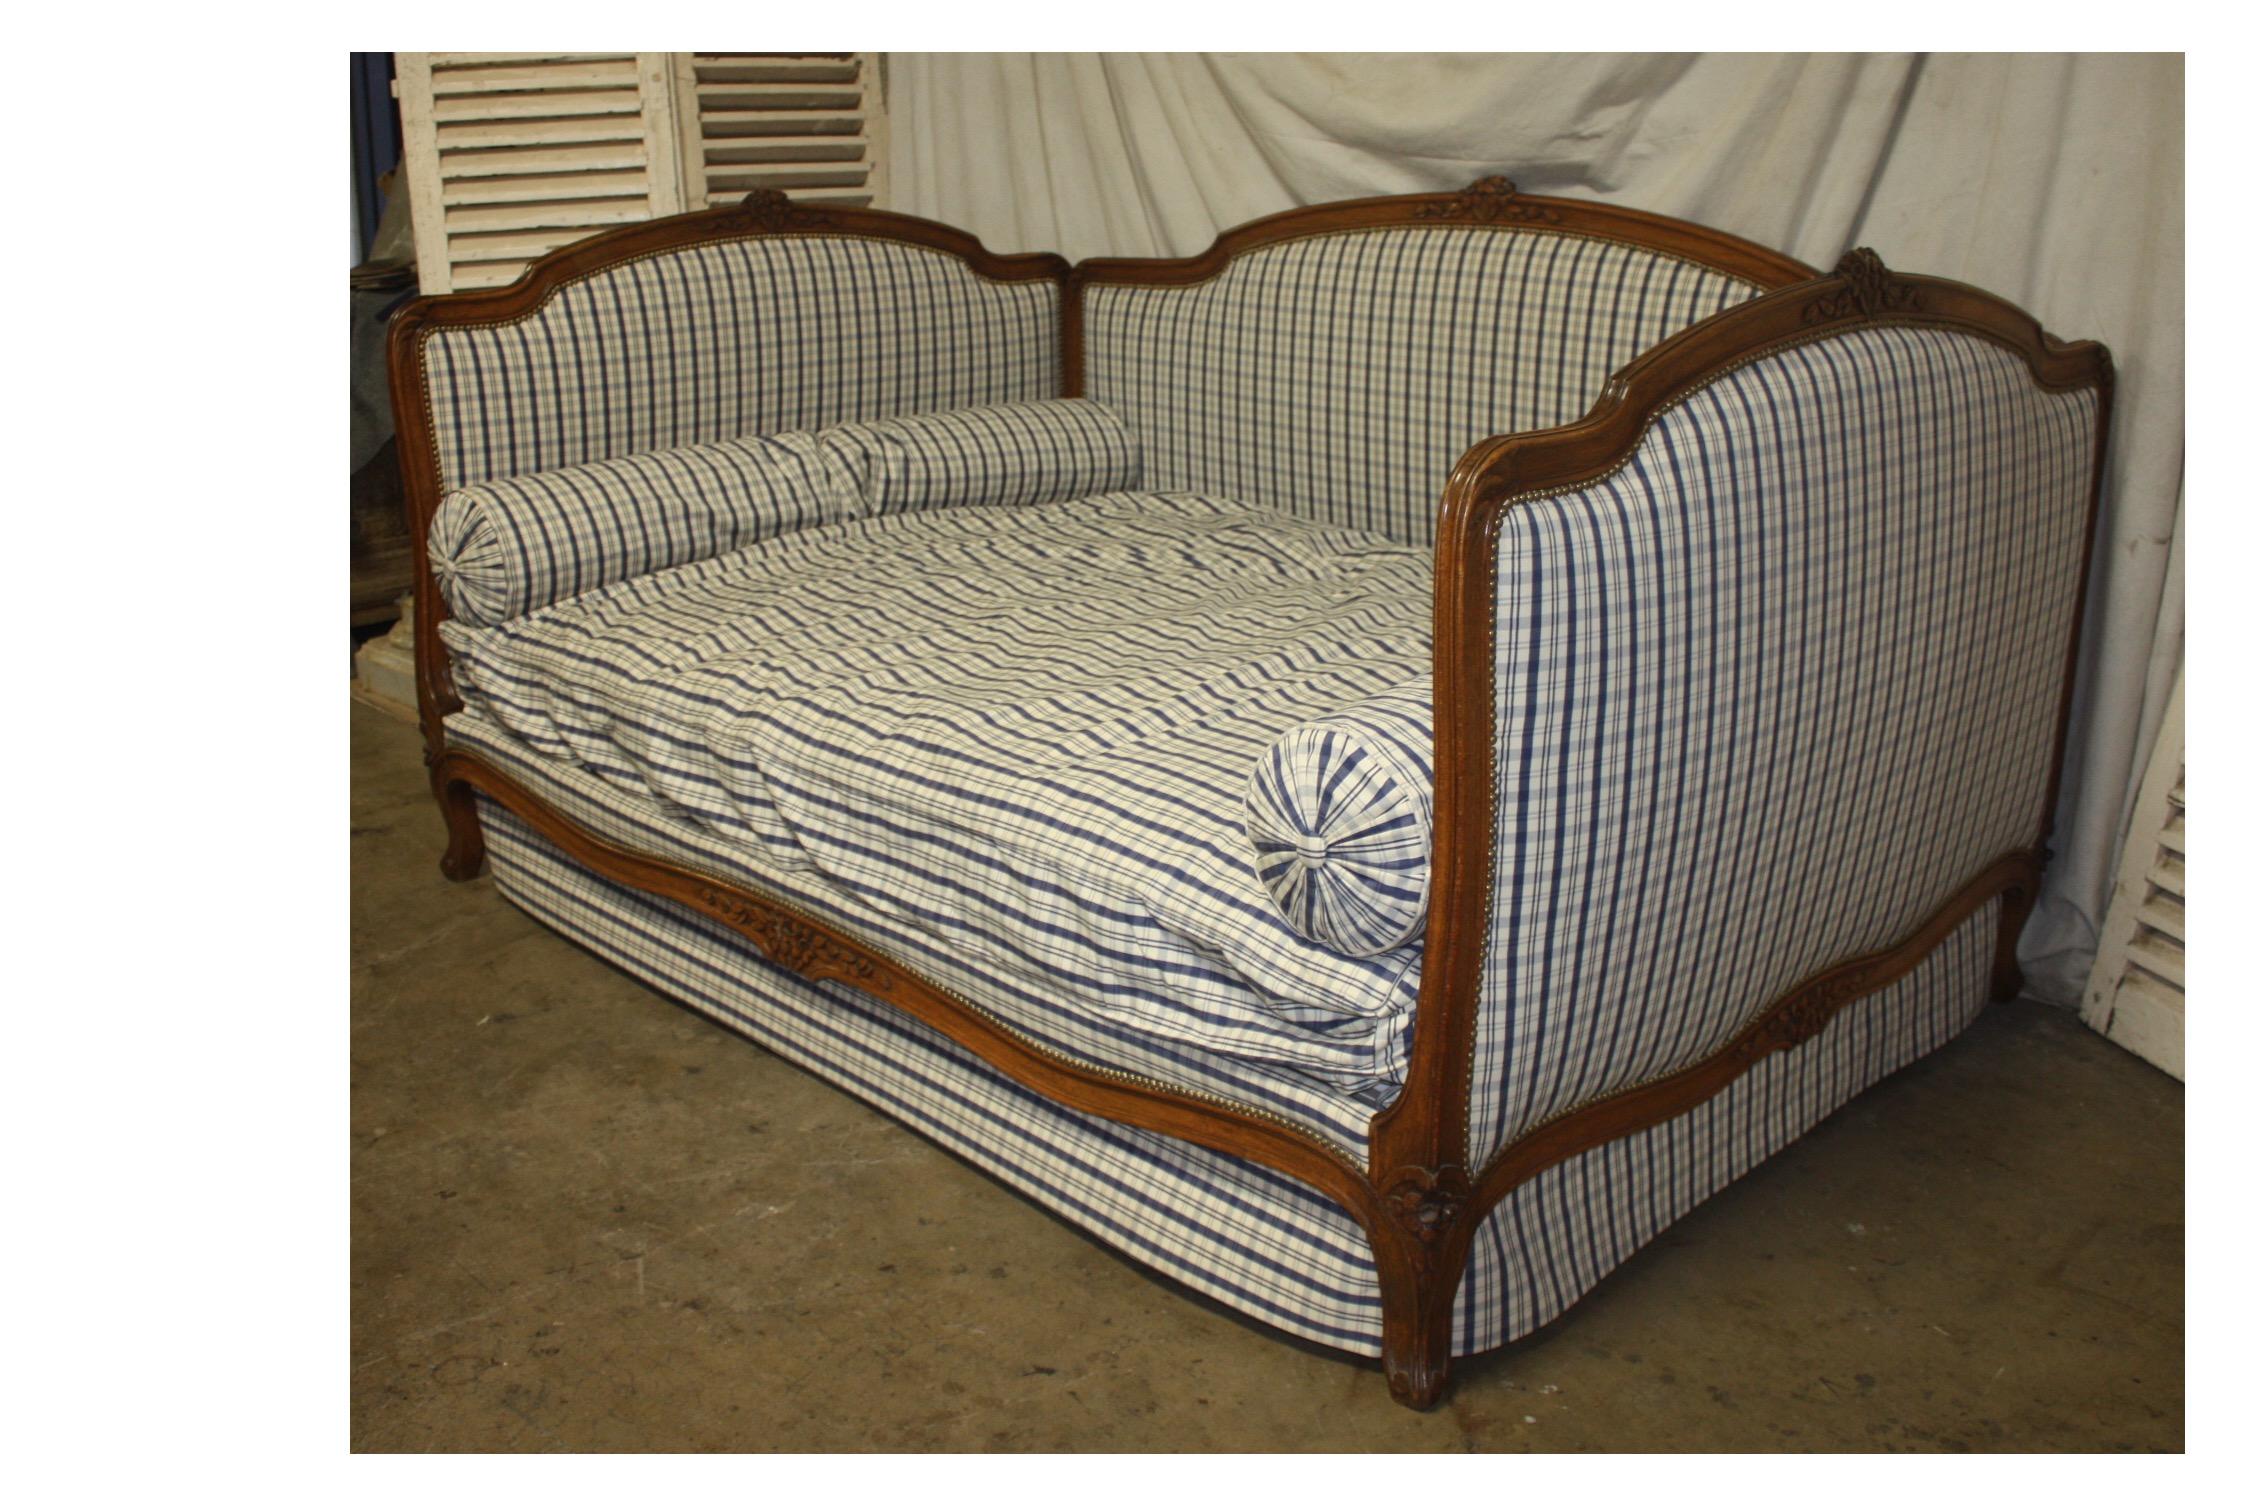 Exquisite 19th century French daybed, Louis XV style.
As the stairways of houses and apartments in France are narrow, they build furniture with the option of disassembling if needed for the transport.
This daybed can be taken apart:
- 3 boards
-